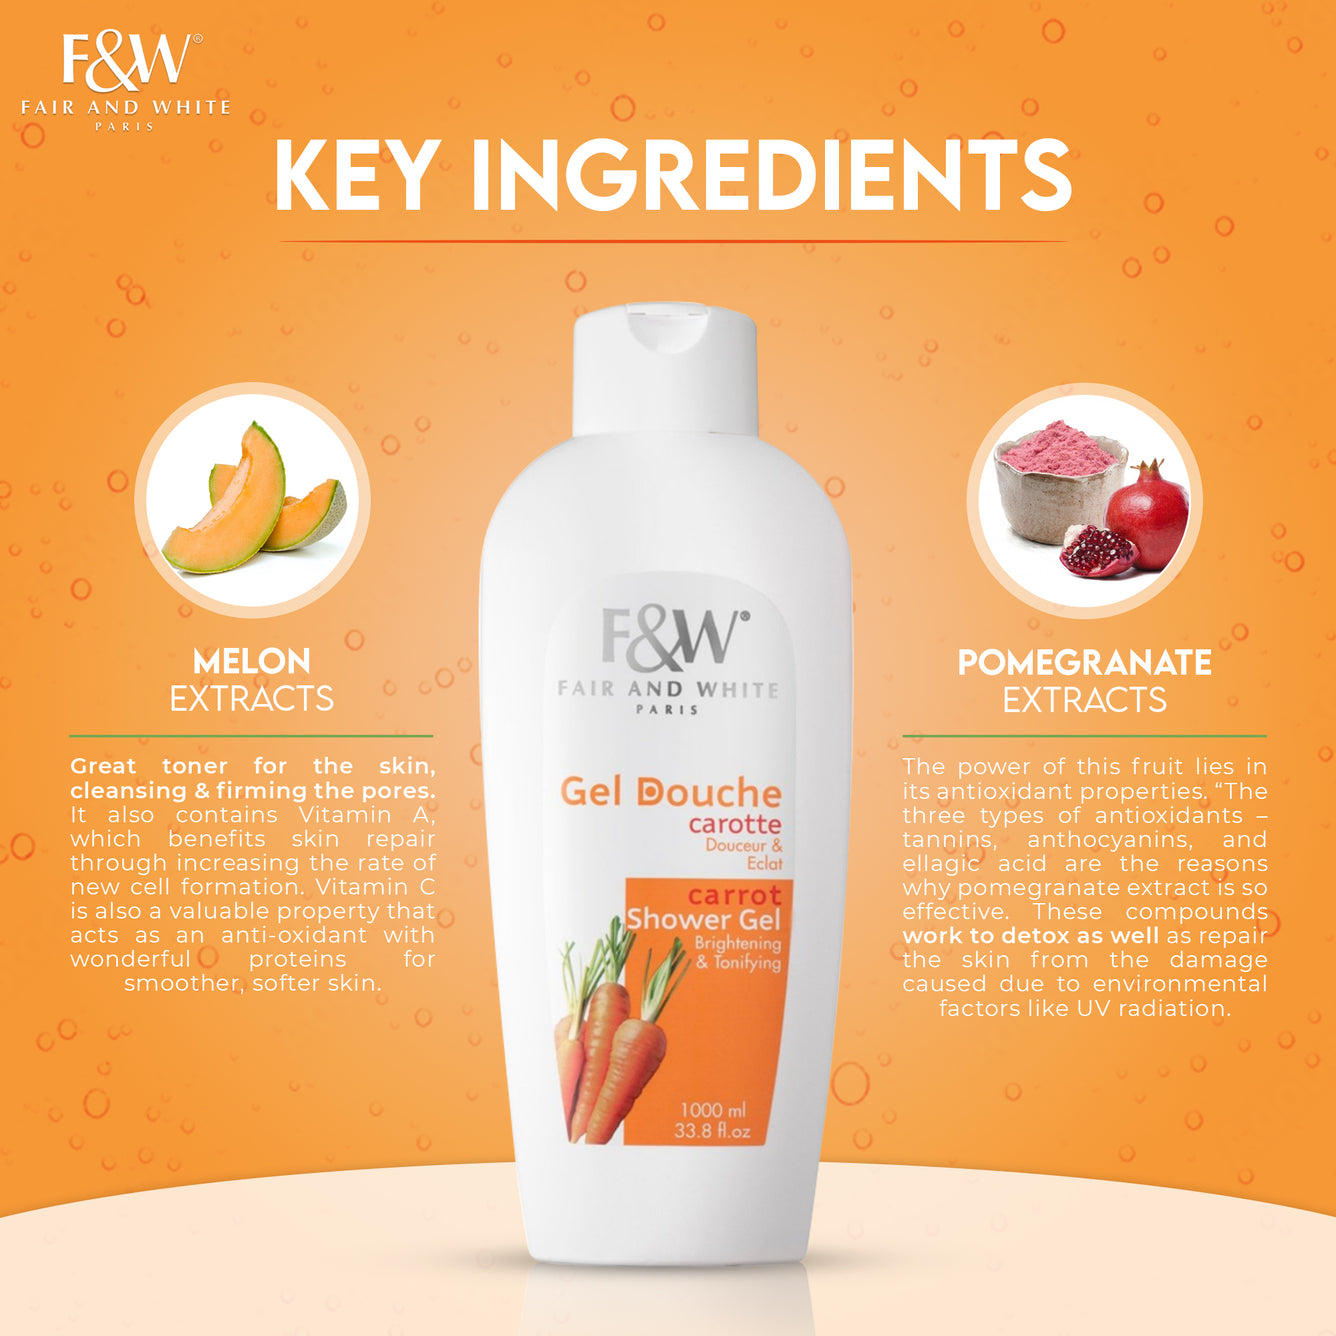 Fair & White Carrot Shower Gel With Pomegranate and Melon Extracts (Jumbo-1000ml) Fair & White So Carrot NEW - Mitchell Brands - Skin Lightening, Skin Brightening, Fade Dark Spots, Shea Butter, Hair Growth Products